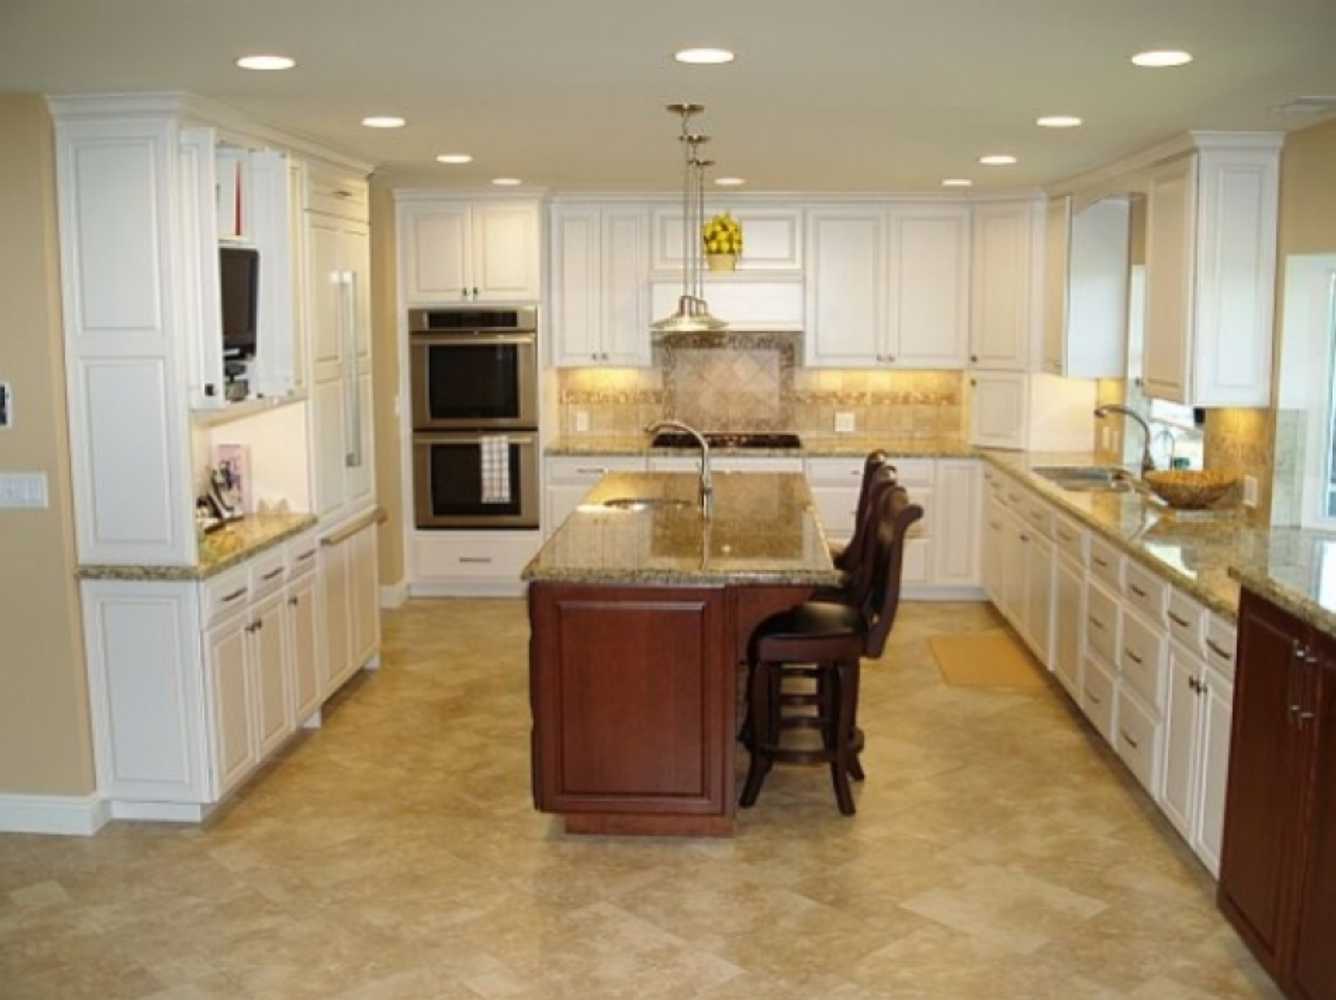 RPV Colt rd. Kitchen project